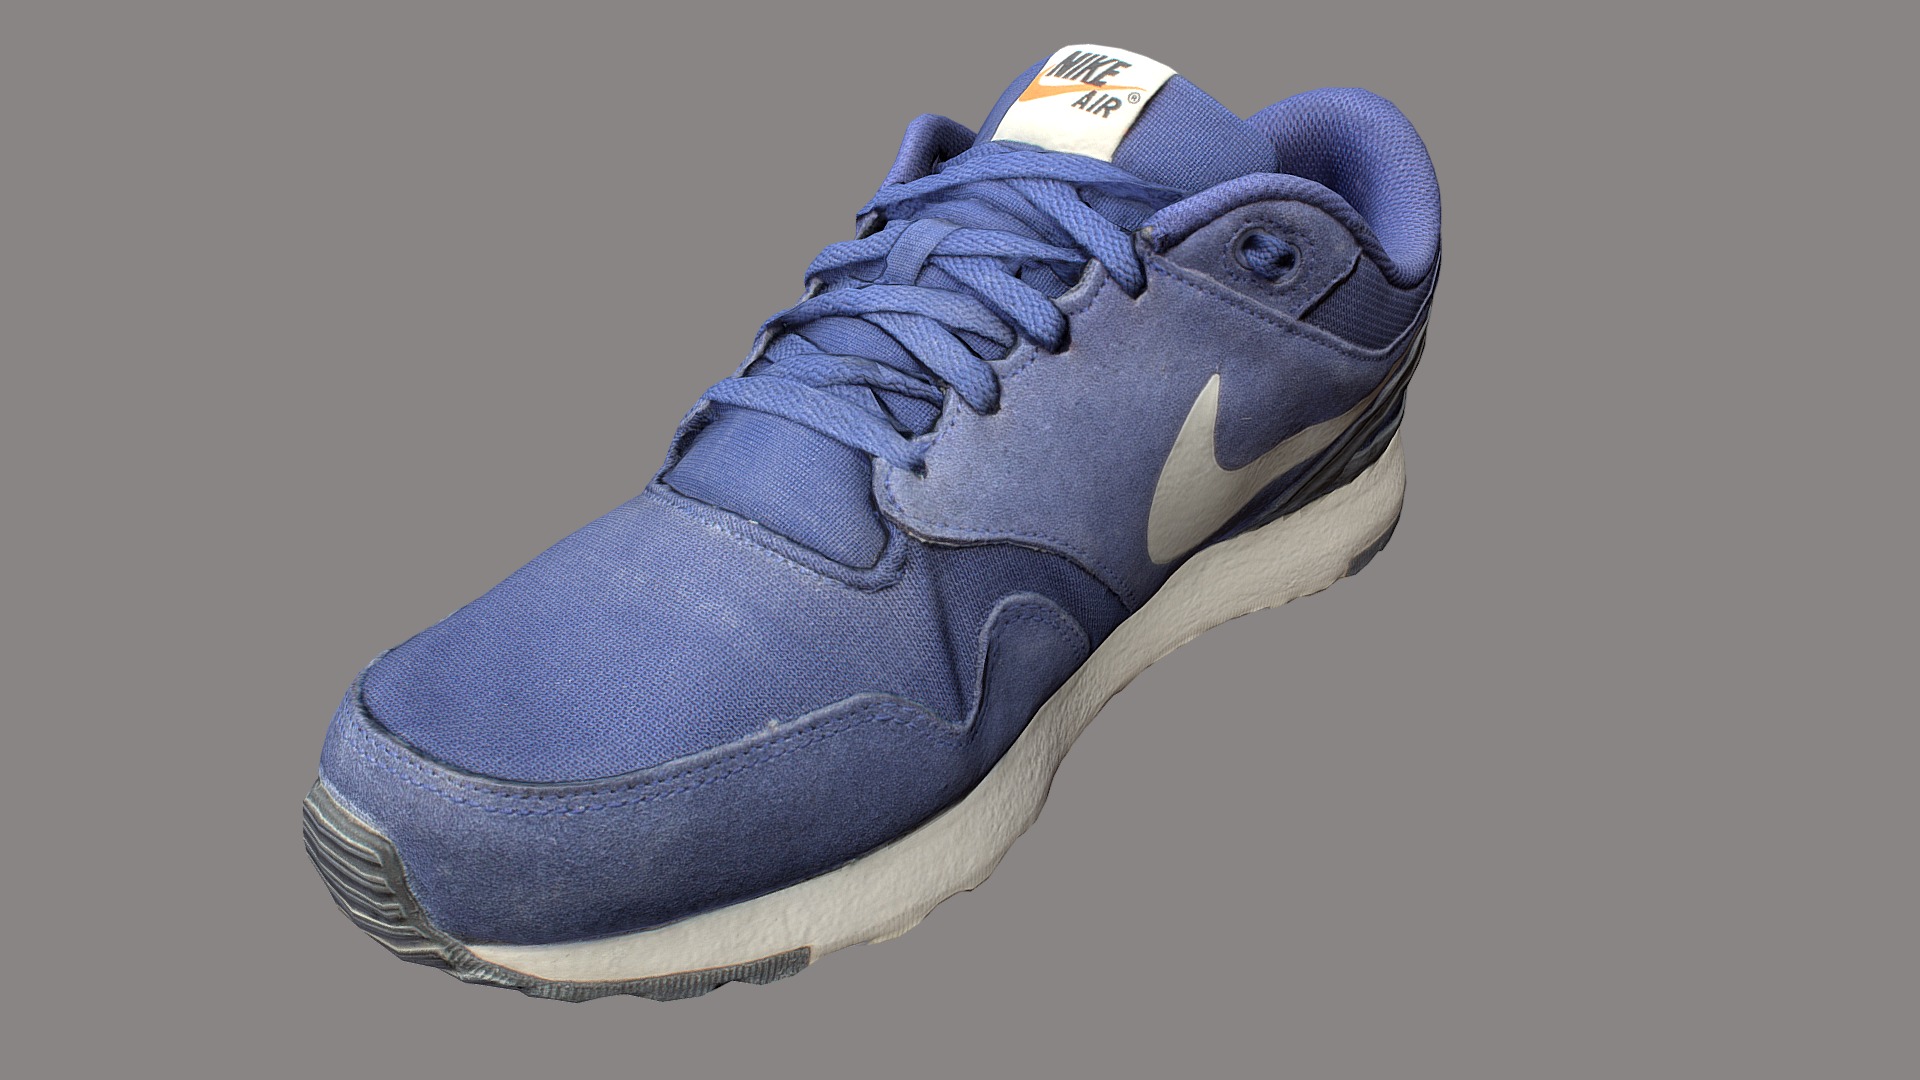 3D model Nike shoe low poly - This is a 3D model of the Nike shoe low poly. The 3D model is about a blue glove on a person's hand.